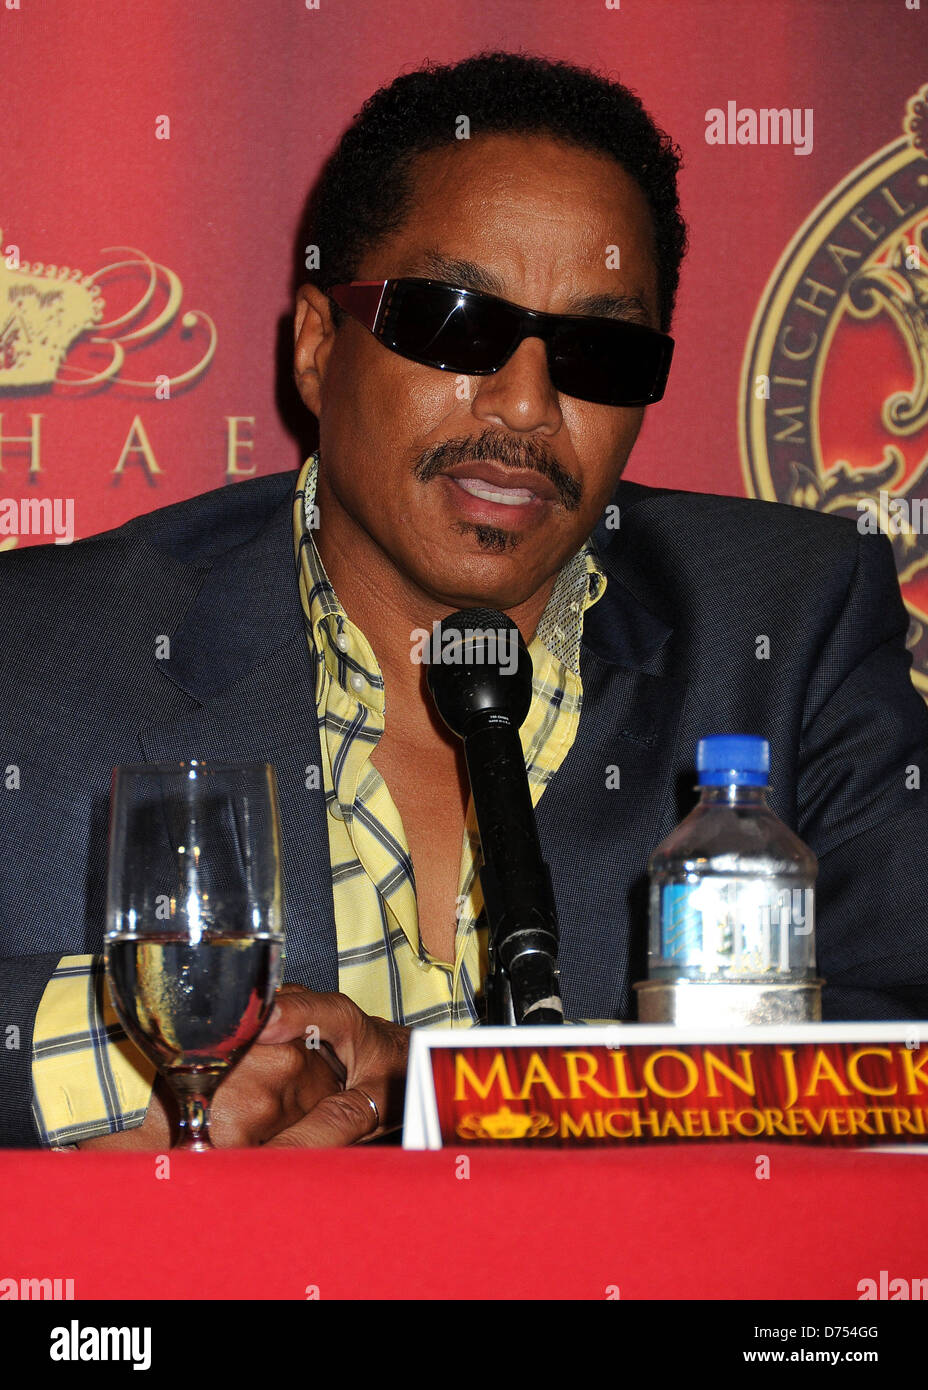 Marlon Jackson 'Michael Forever The Tribute Concert' Press Conference held at The Beverly Hills Hotel Los Angeles, California - 25.07.11 Stock Photo